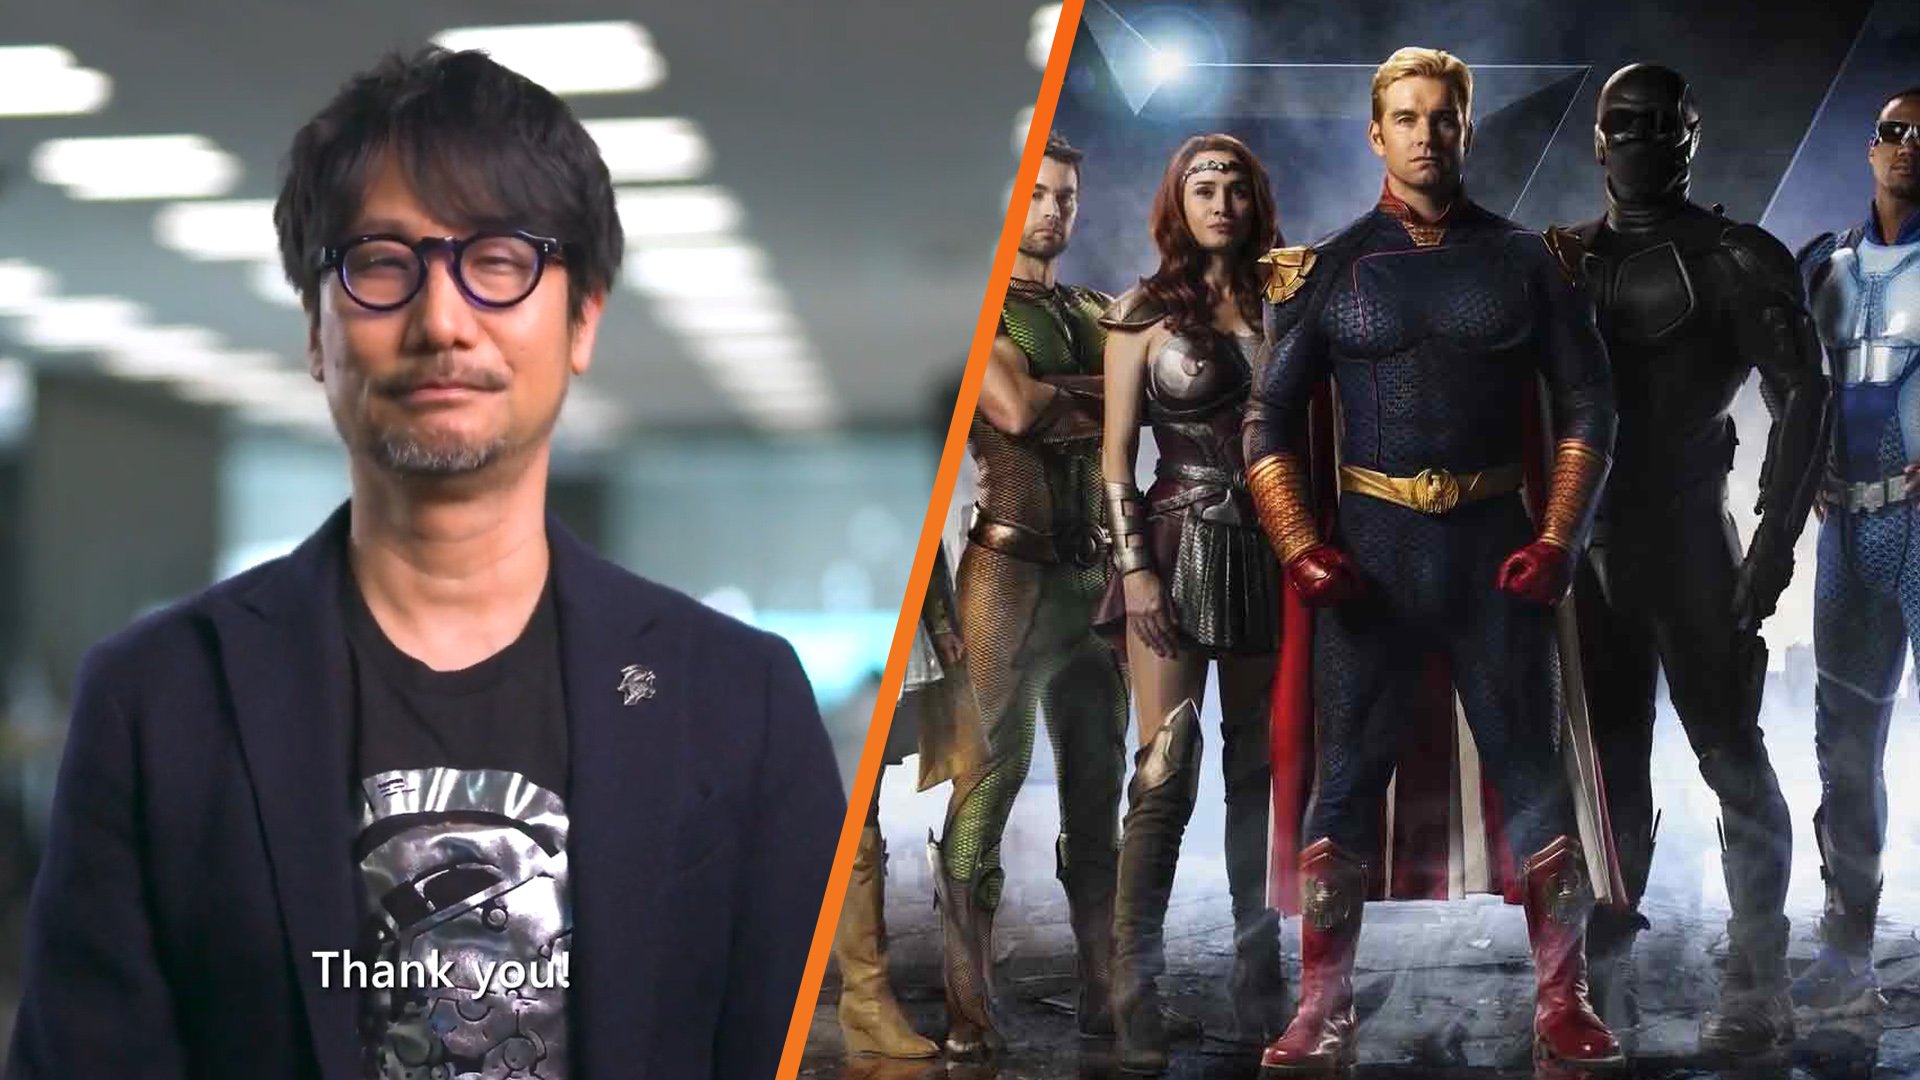 Hideo Kojima wants to give up games, go into movies